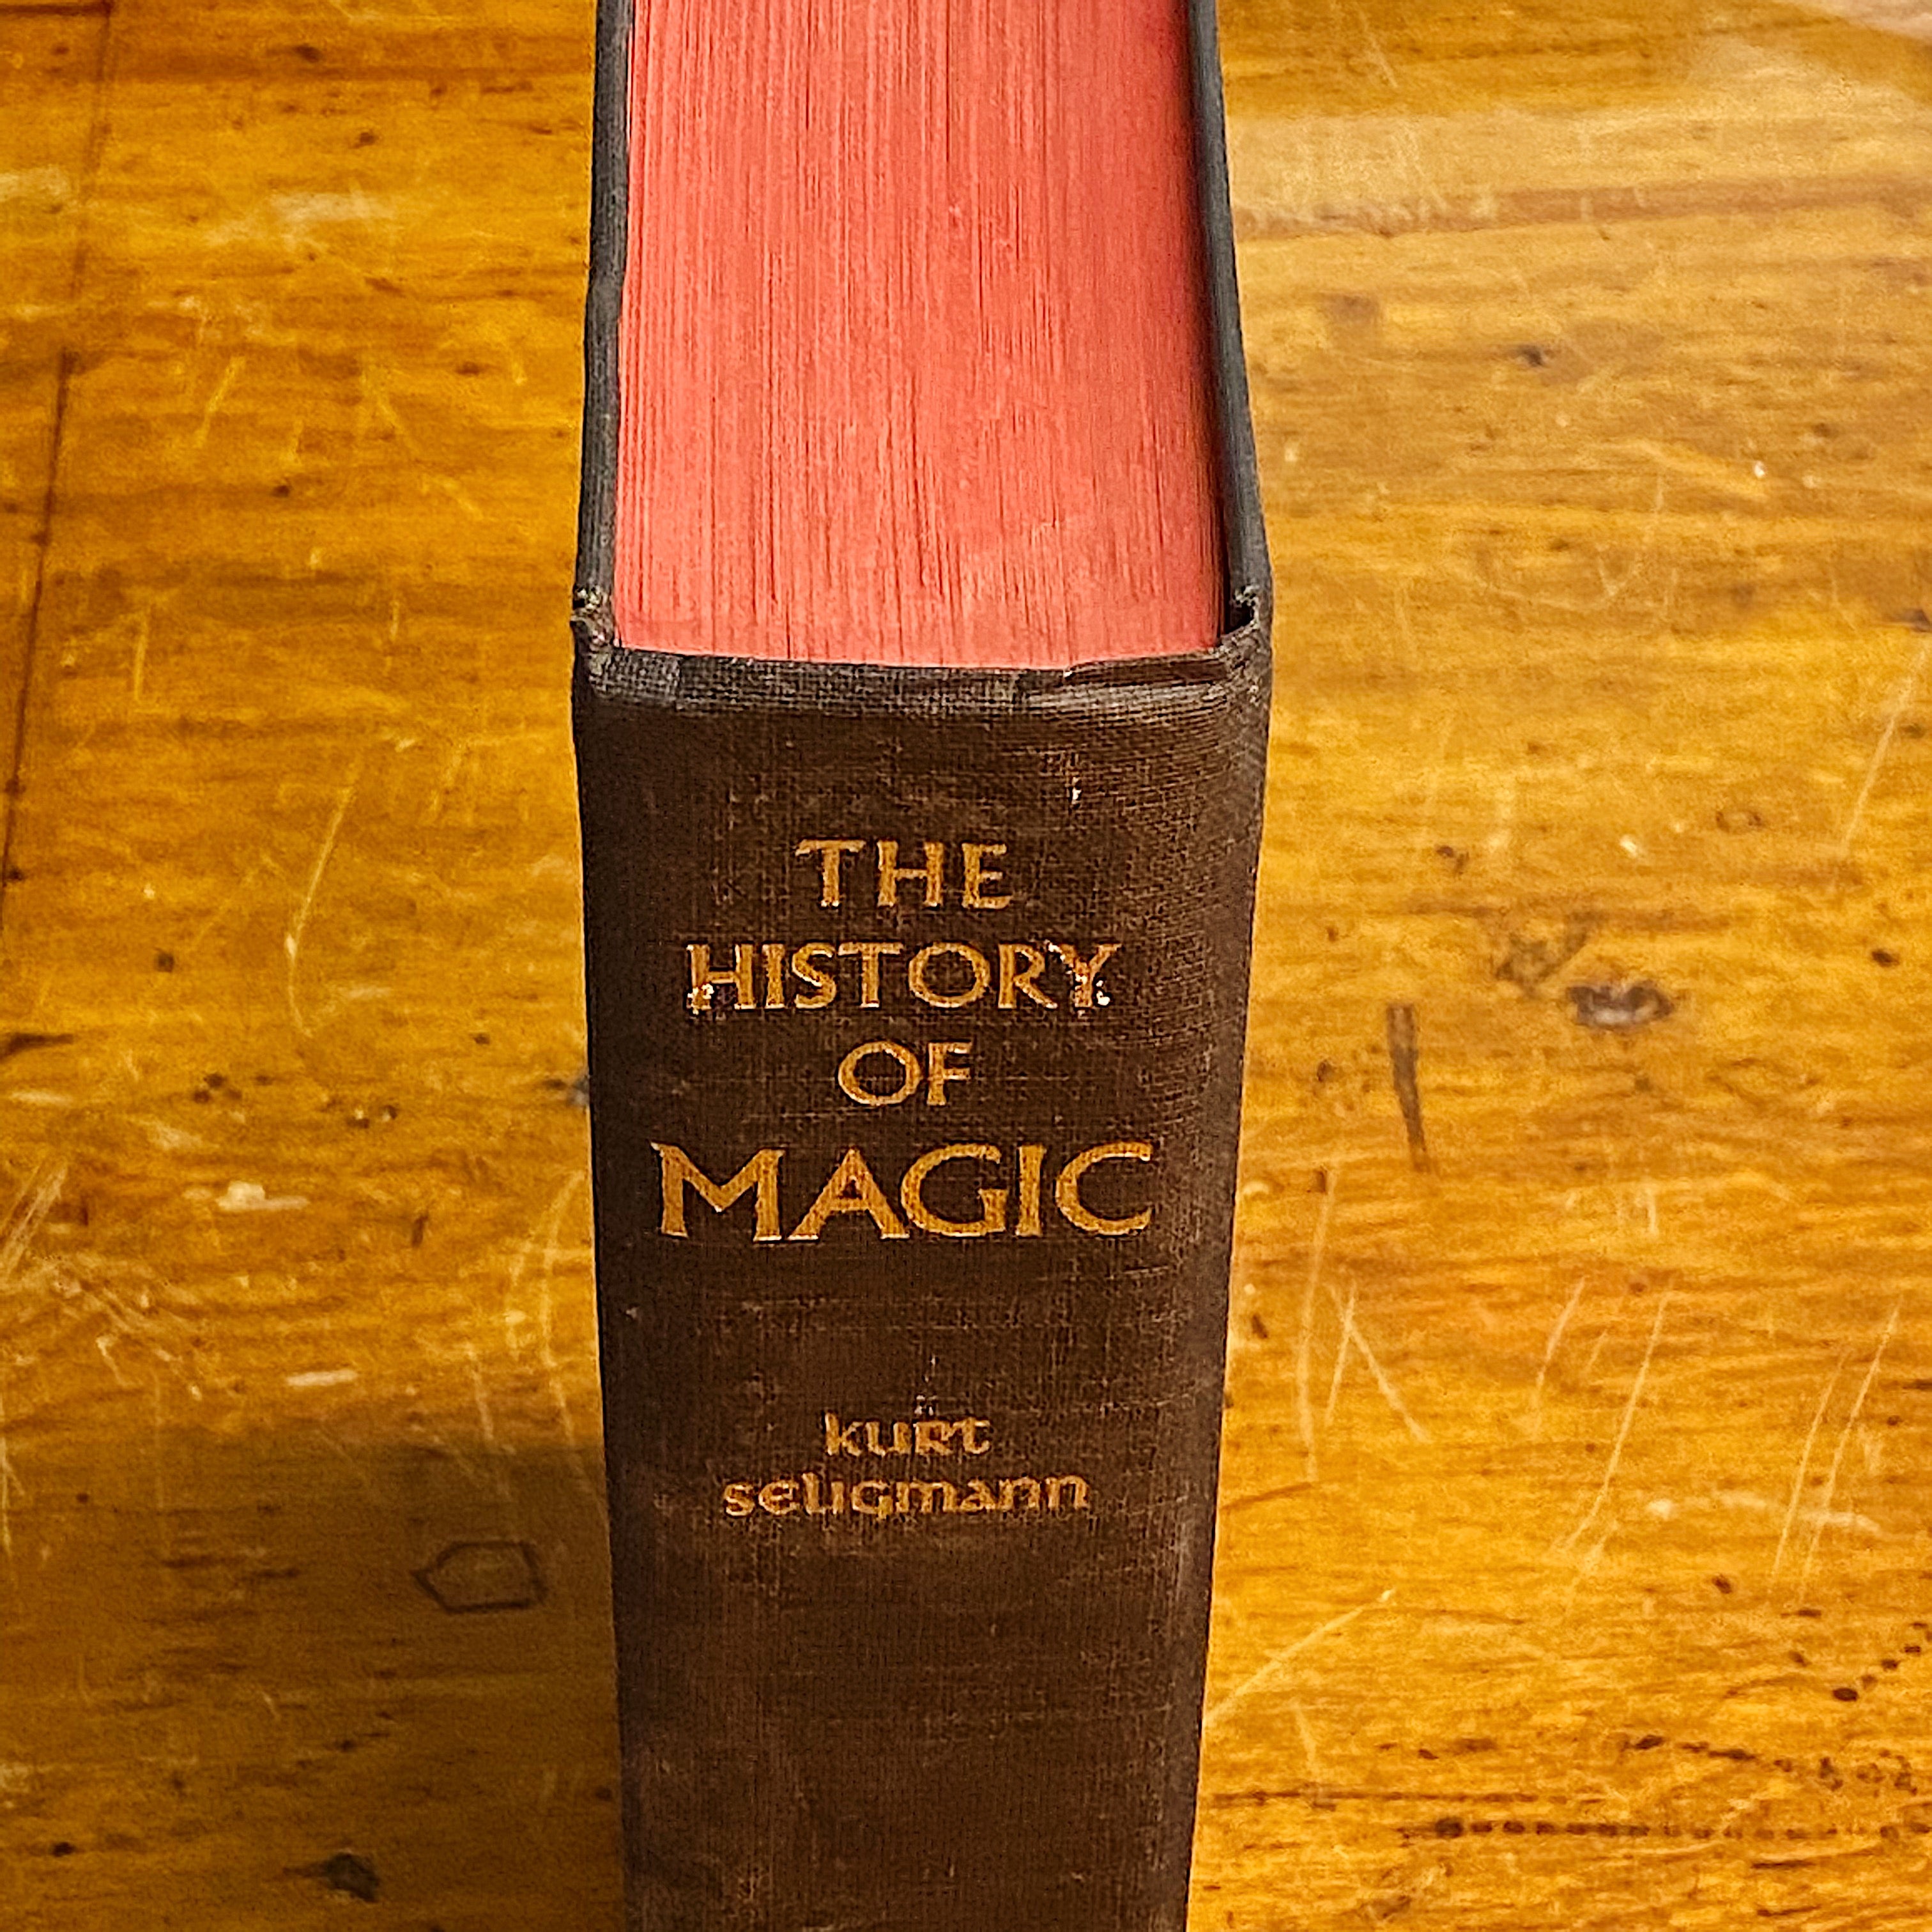 The History Of Magic By Kurt Seligmann - Rare 1st Edition from 1948 - 250 Illustrations - Illustrated Occult Books - Occultism